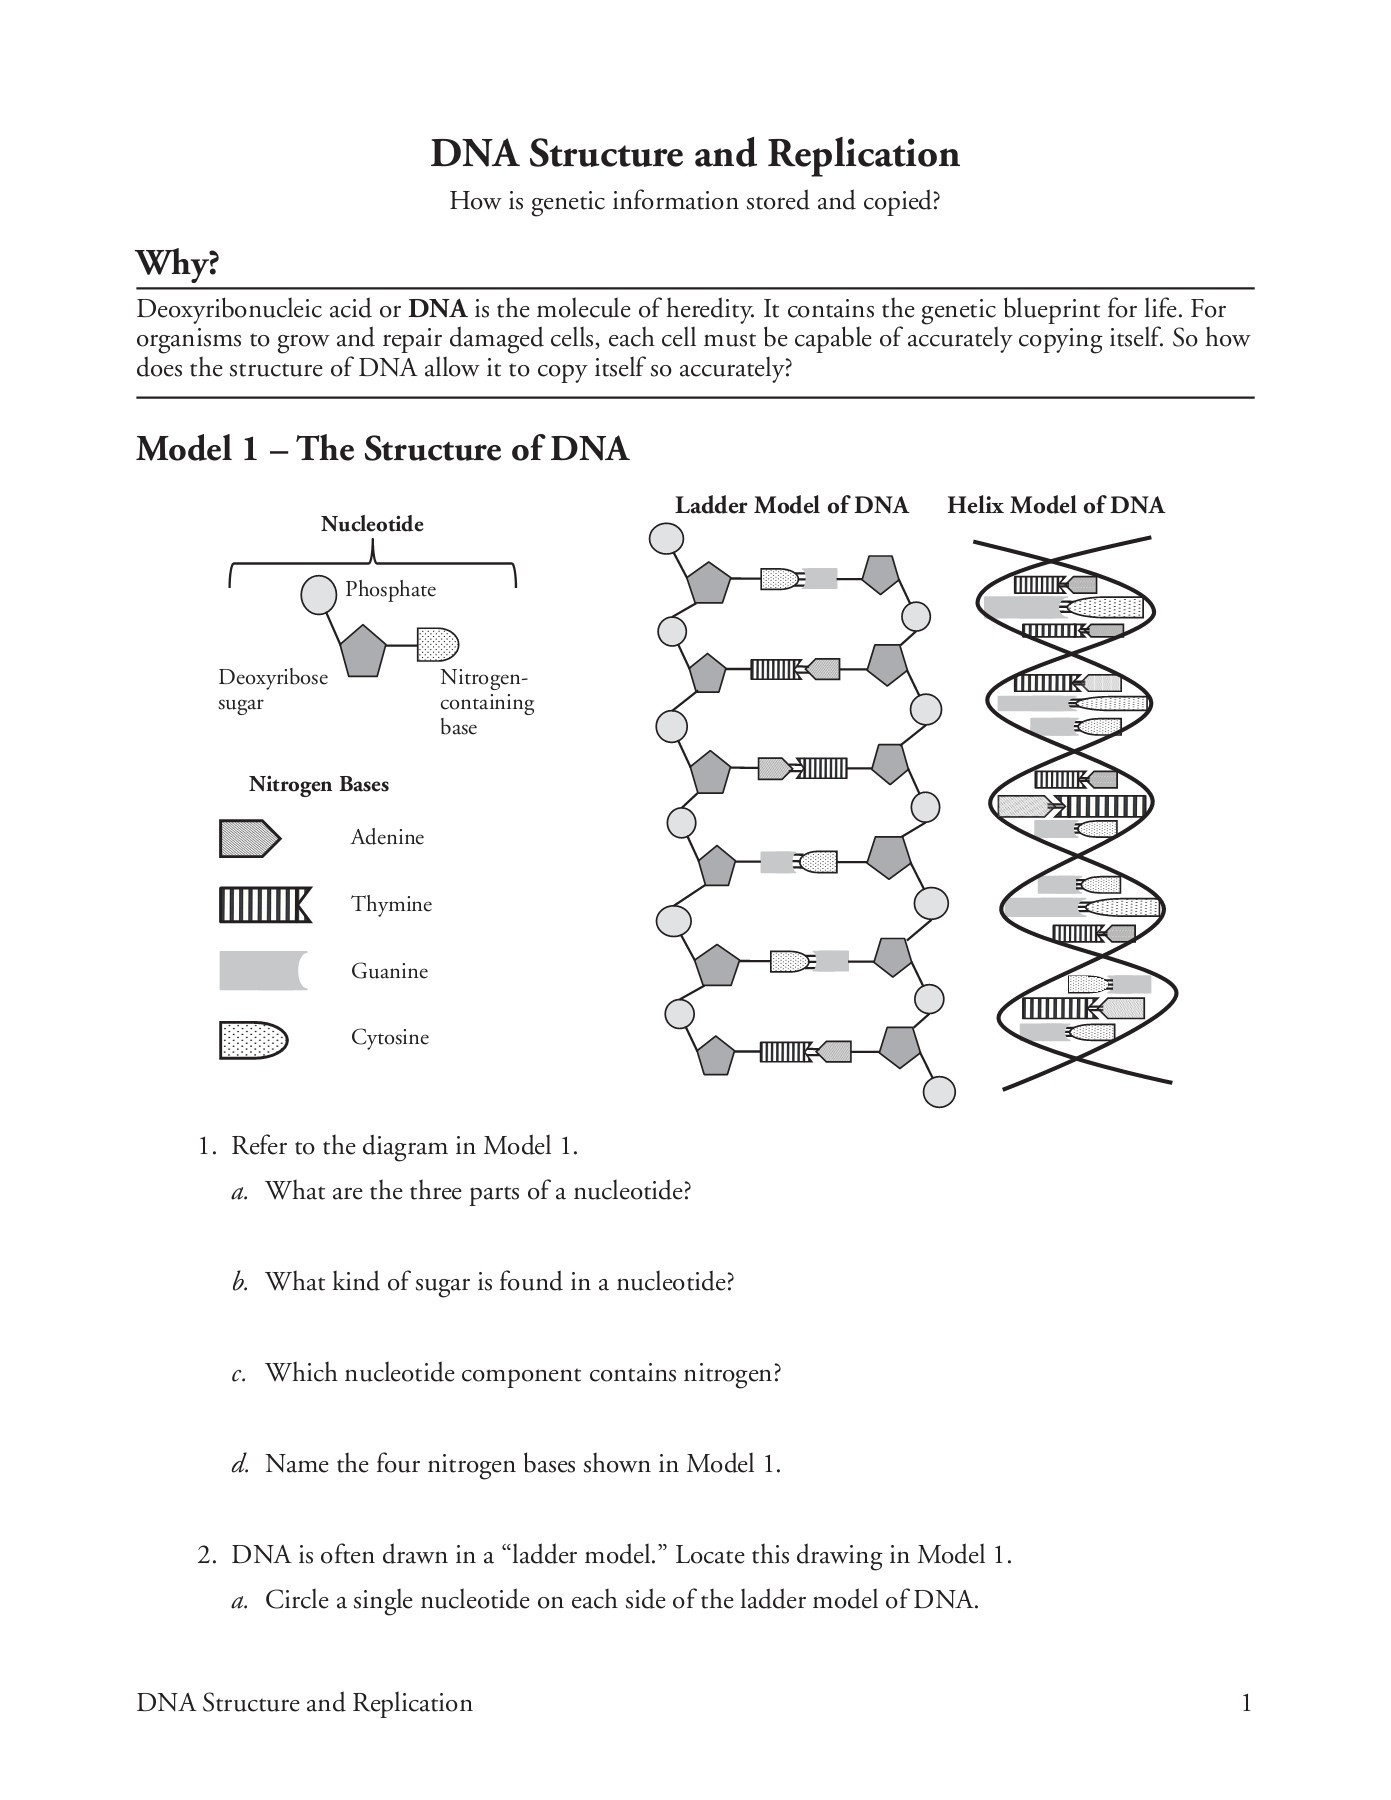 Dna Replication Worksheet Key Dna Structure and Replication Pages 1 5 Text Version